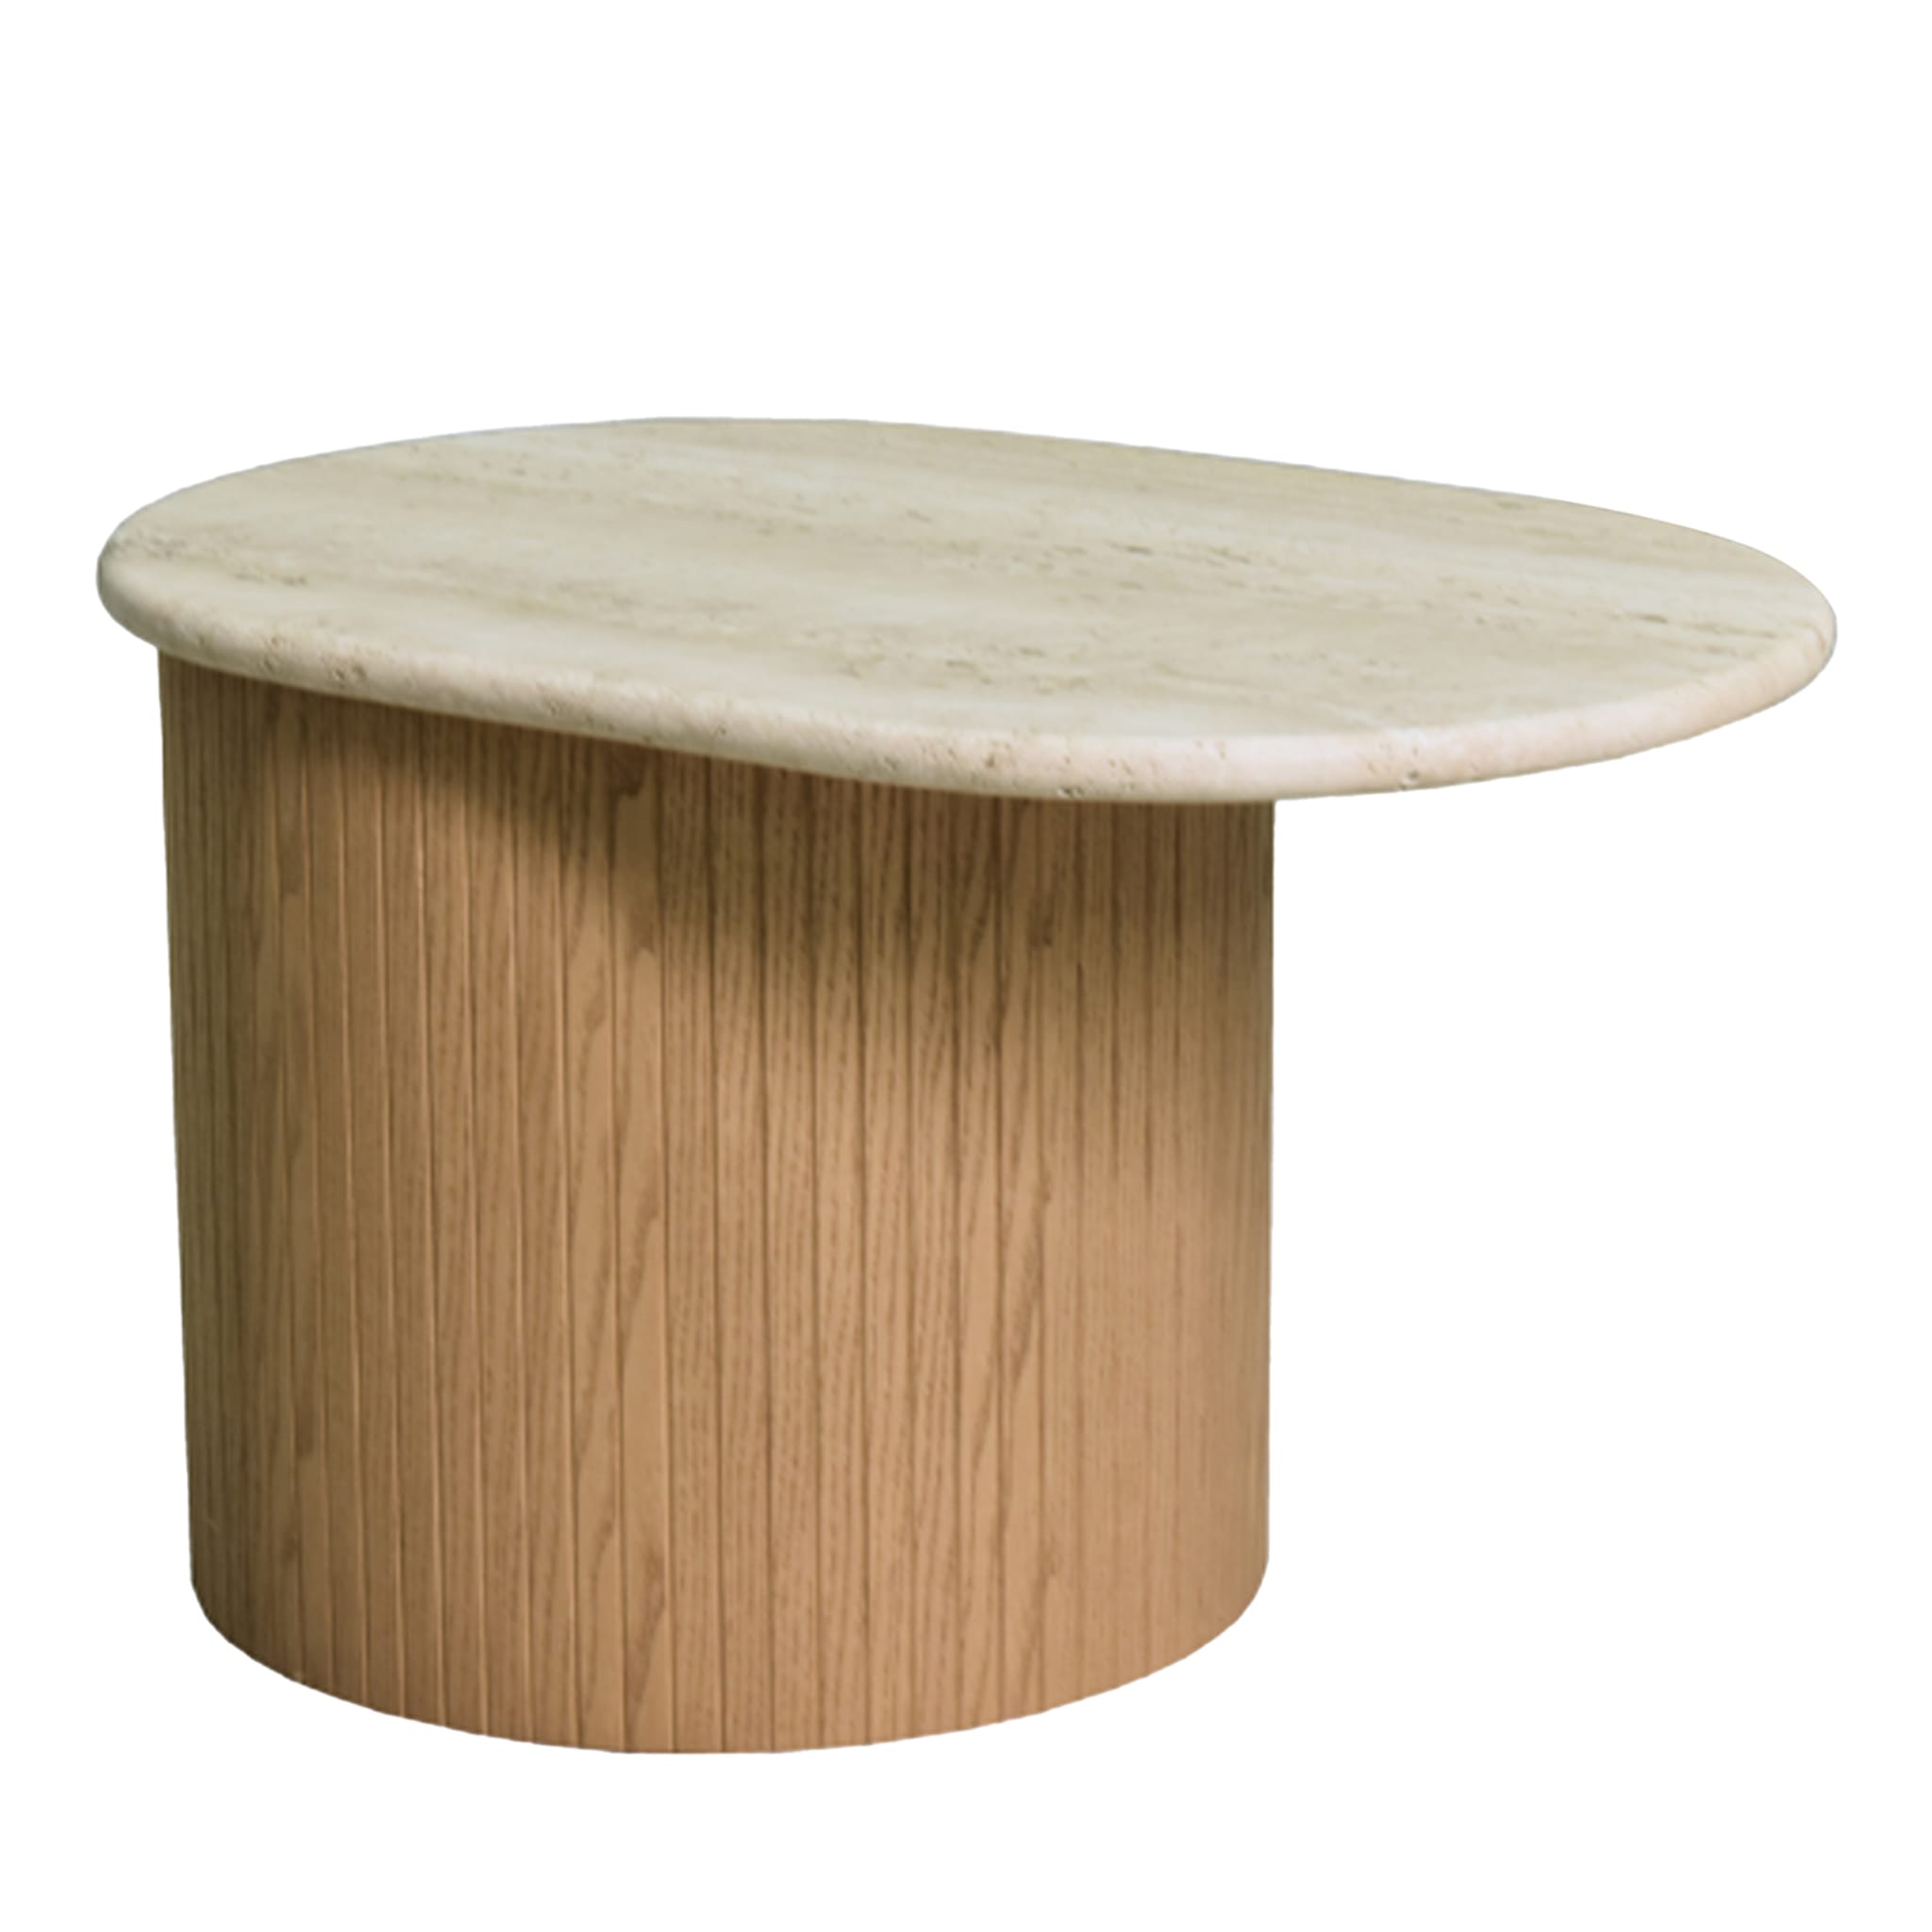 Bitta Side Table with Travertine Marble Top #2 by Libero Rutilo - Main view